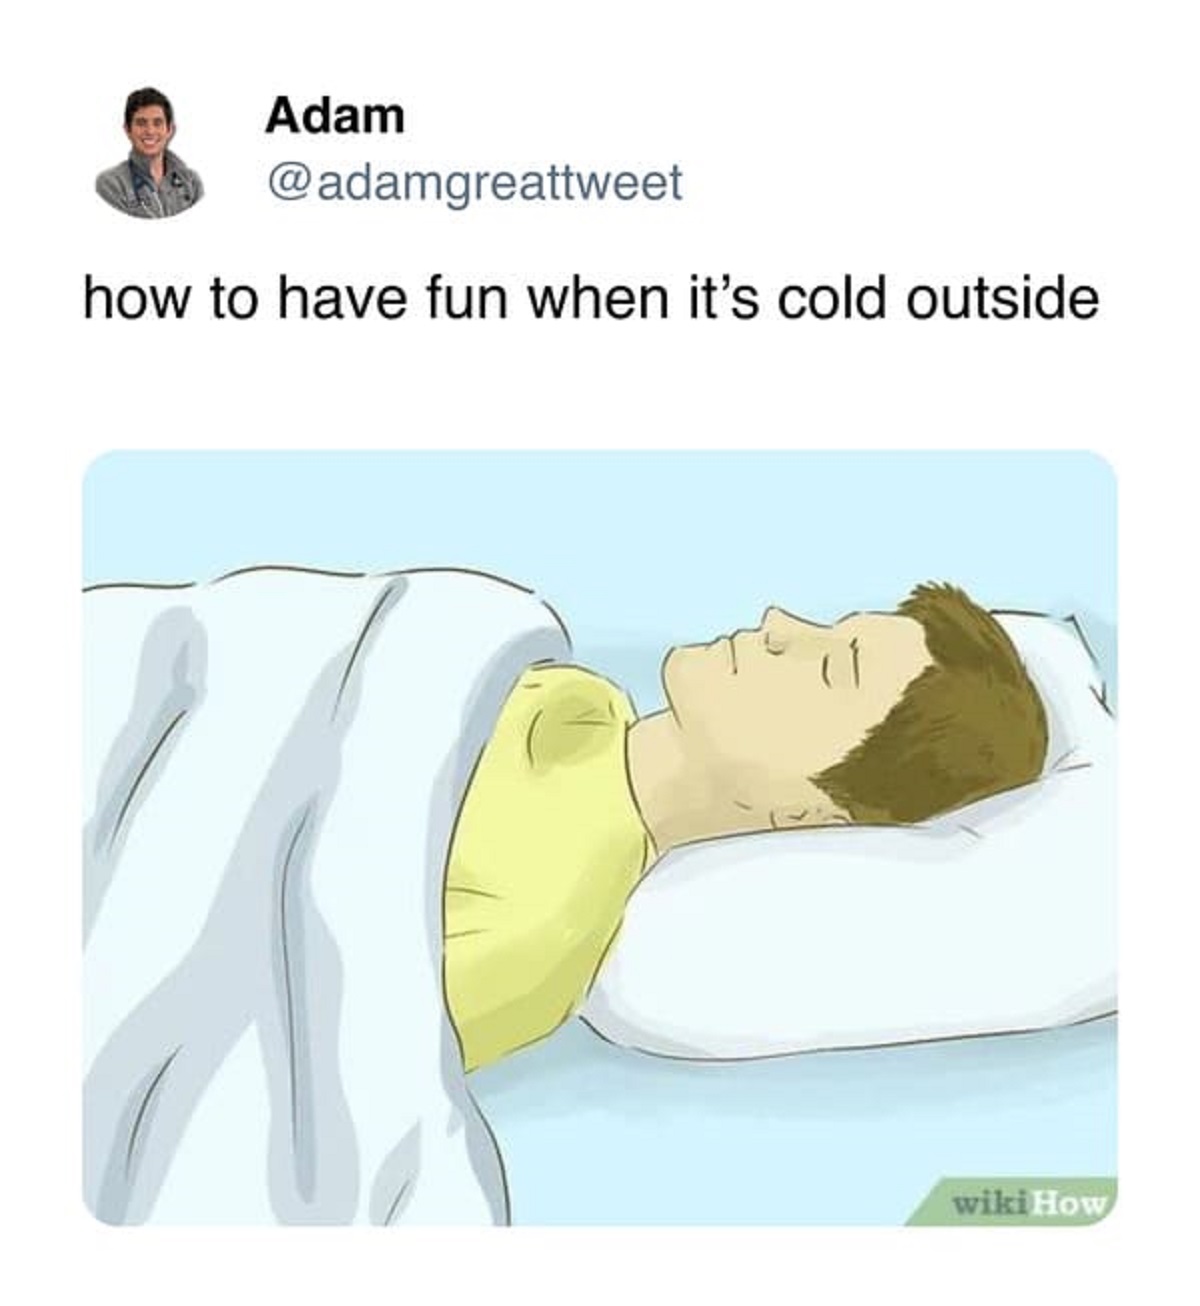 water - Adam how to have fun when it's cold outside X wiki How